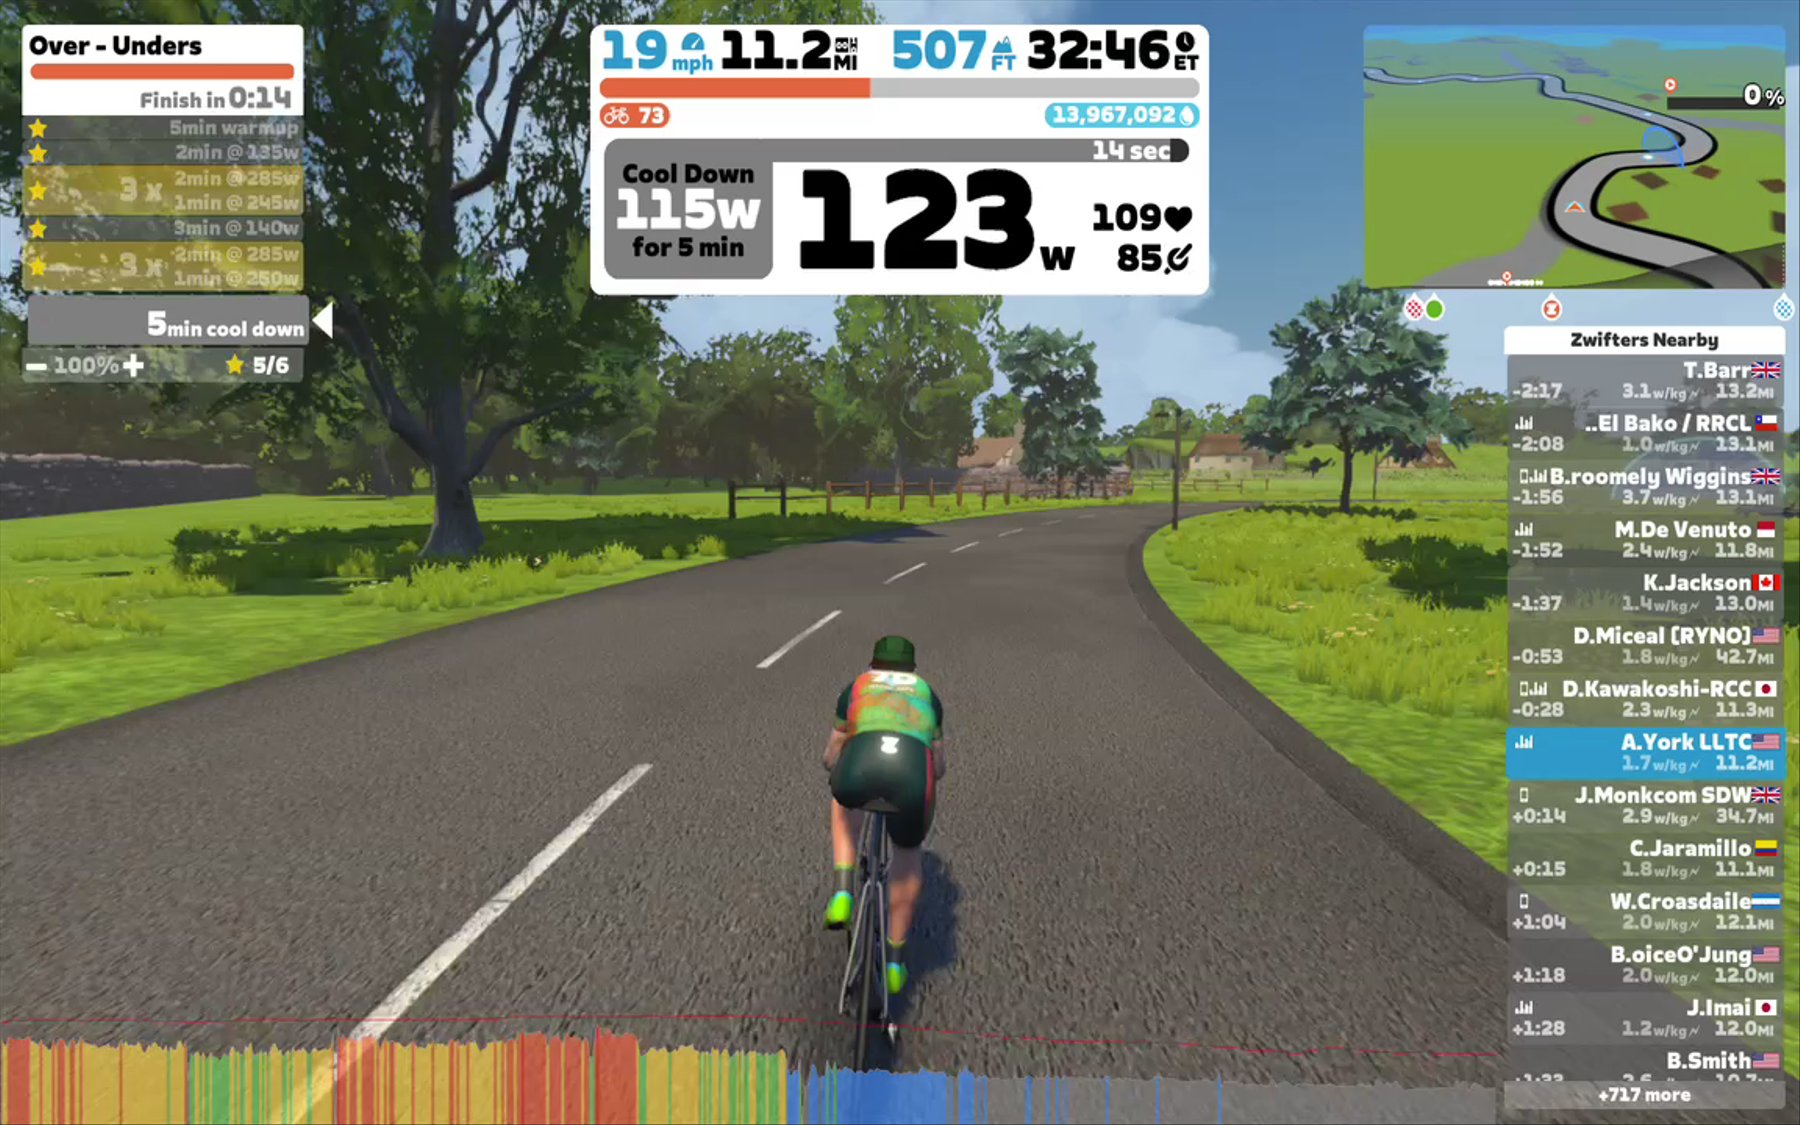 Zwift - Over - Unders in France